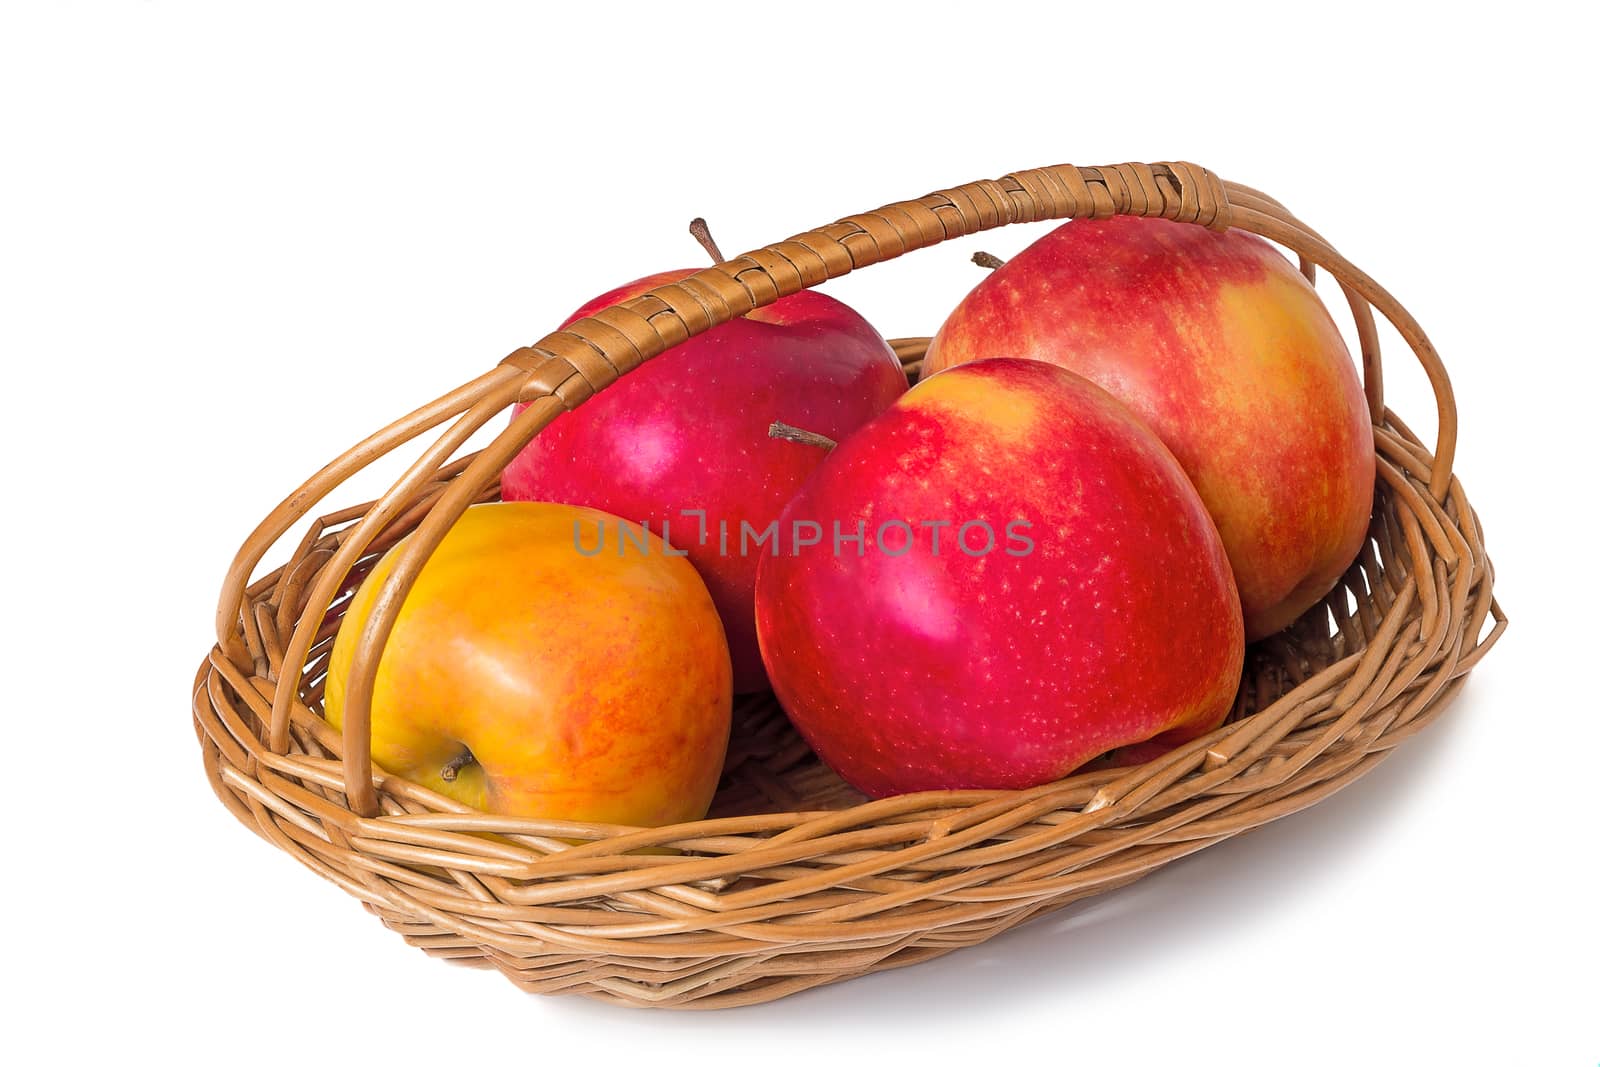 Big mature apples are in wattled to a basket on a table. Are presented on a white background.